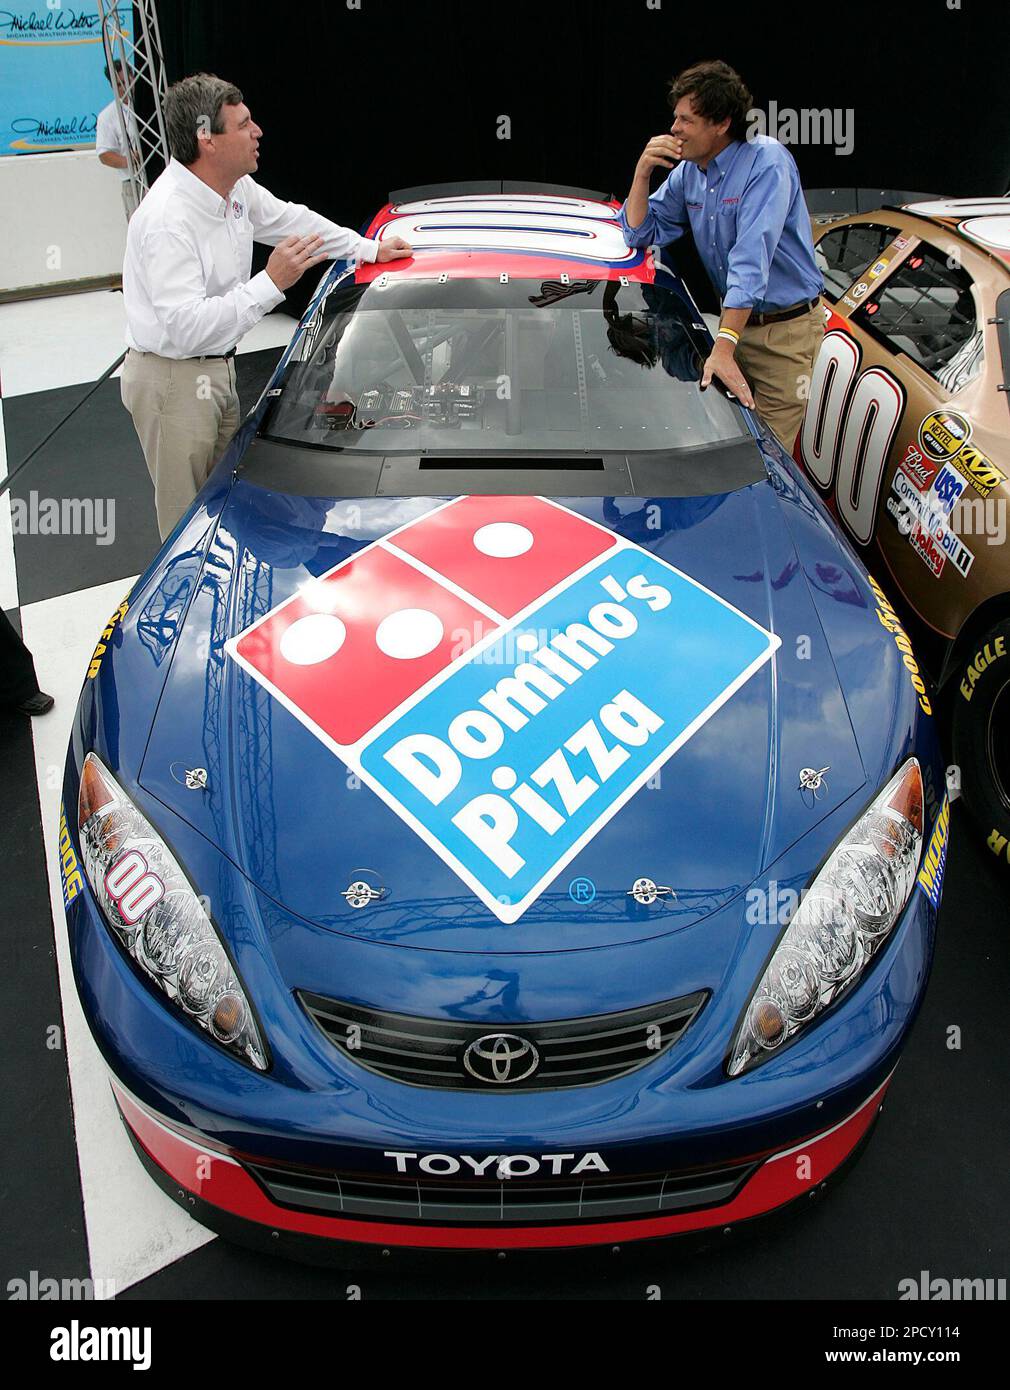 Domino's Pizza Chairman and Chief Executive Officer David A. Brandon, left,  talks with NASCAR team owner Michael Waltrip after announcing Dominos and  Burger King sponsorship of the Toyota 00 car for 2007